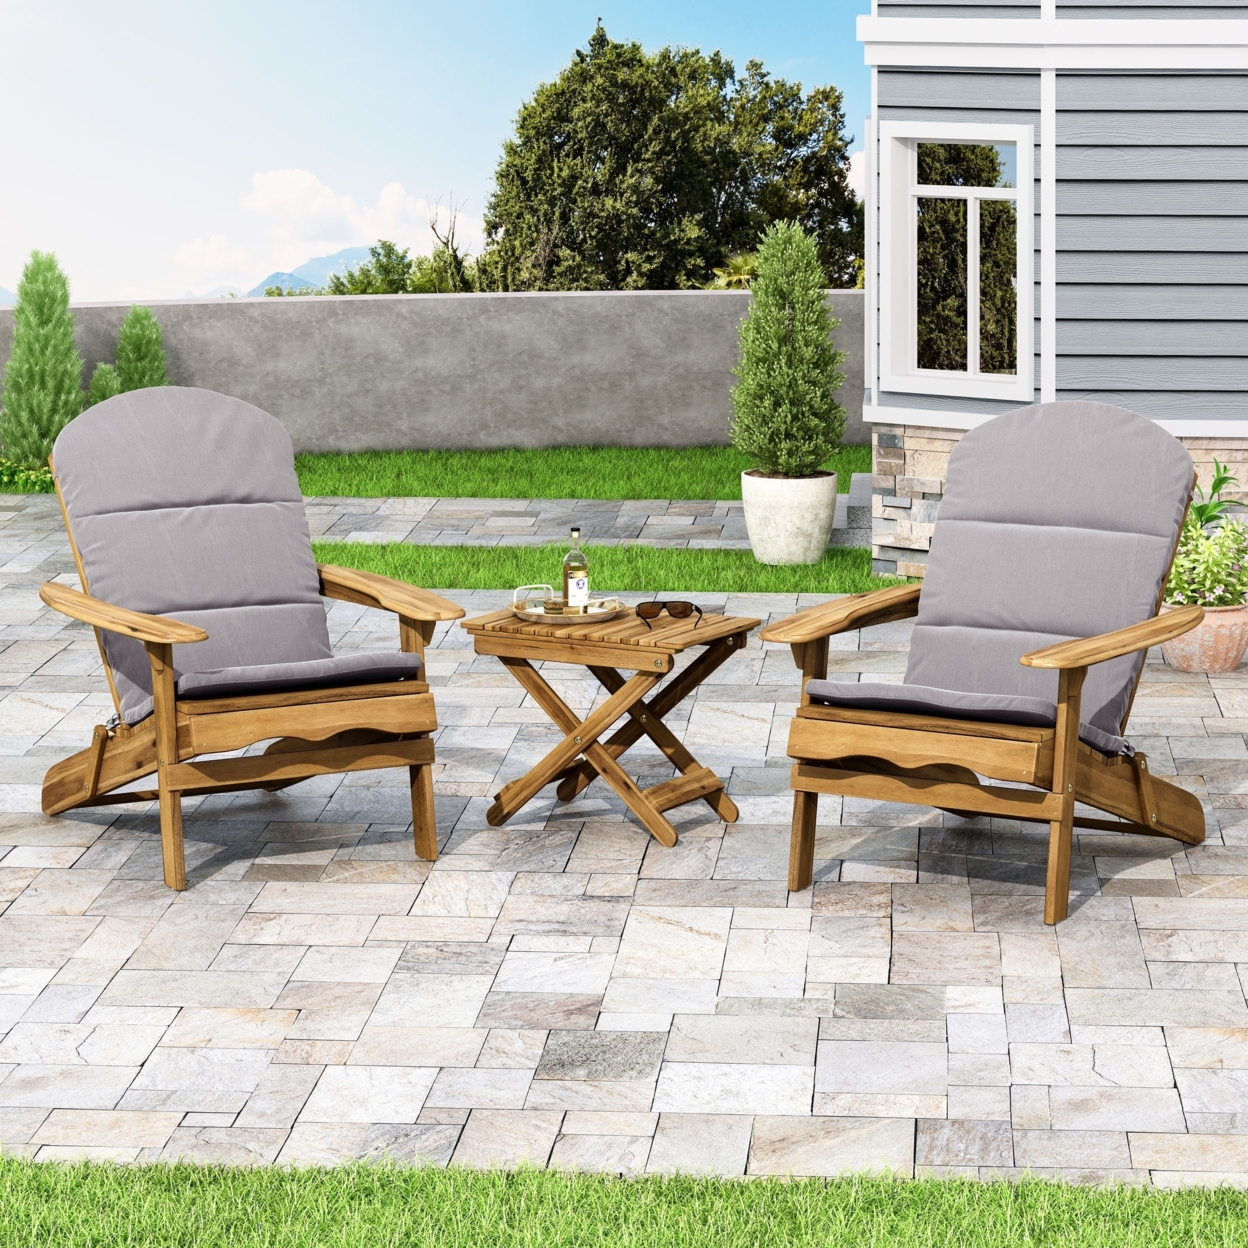 Reed Outdoor 2 Seater Acacia Wood Chat Set With Water Resistant Cushions - Dark Gray/gray